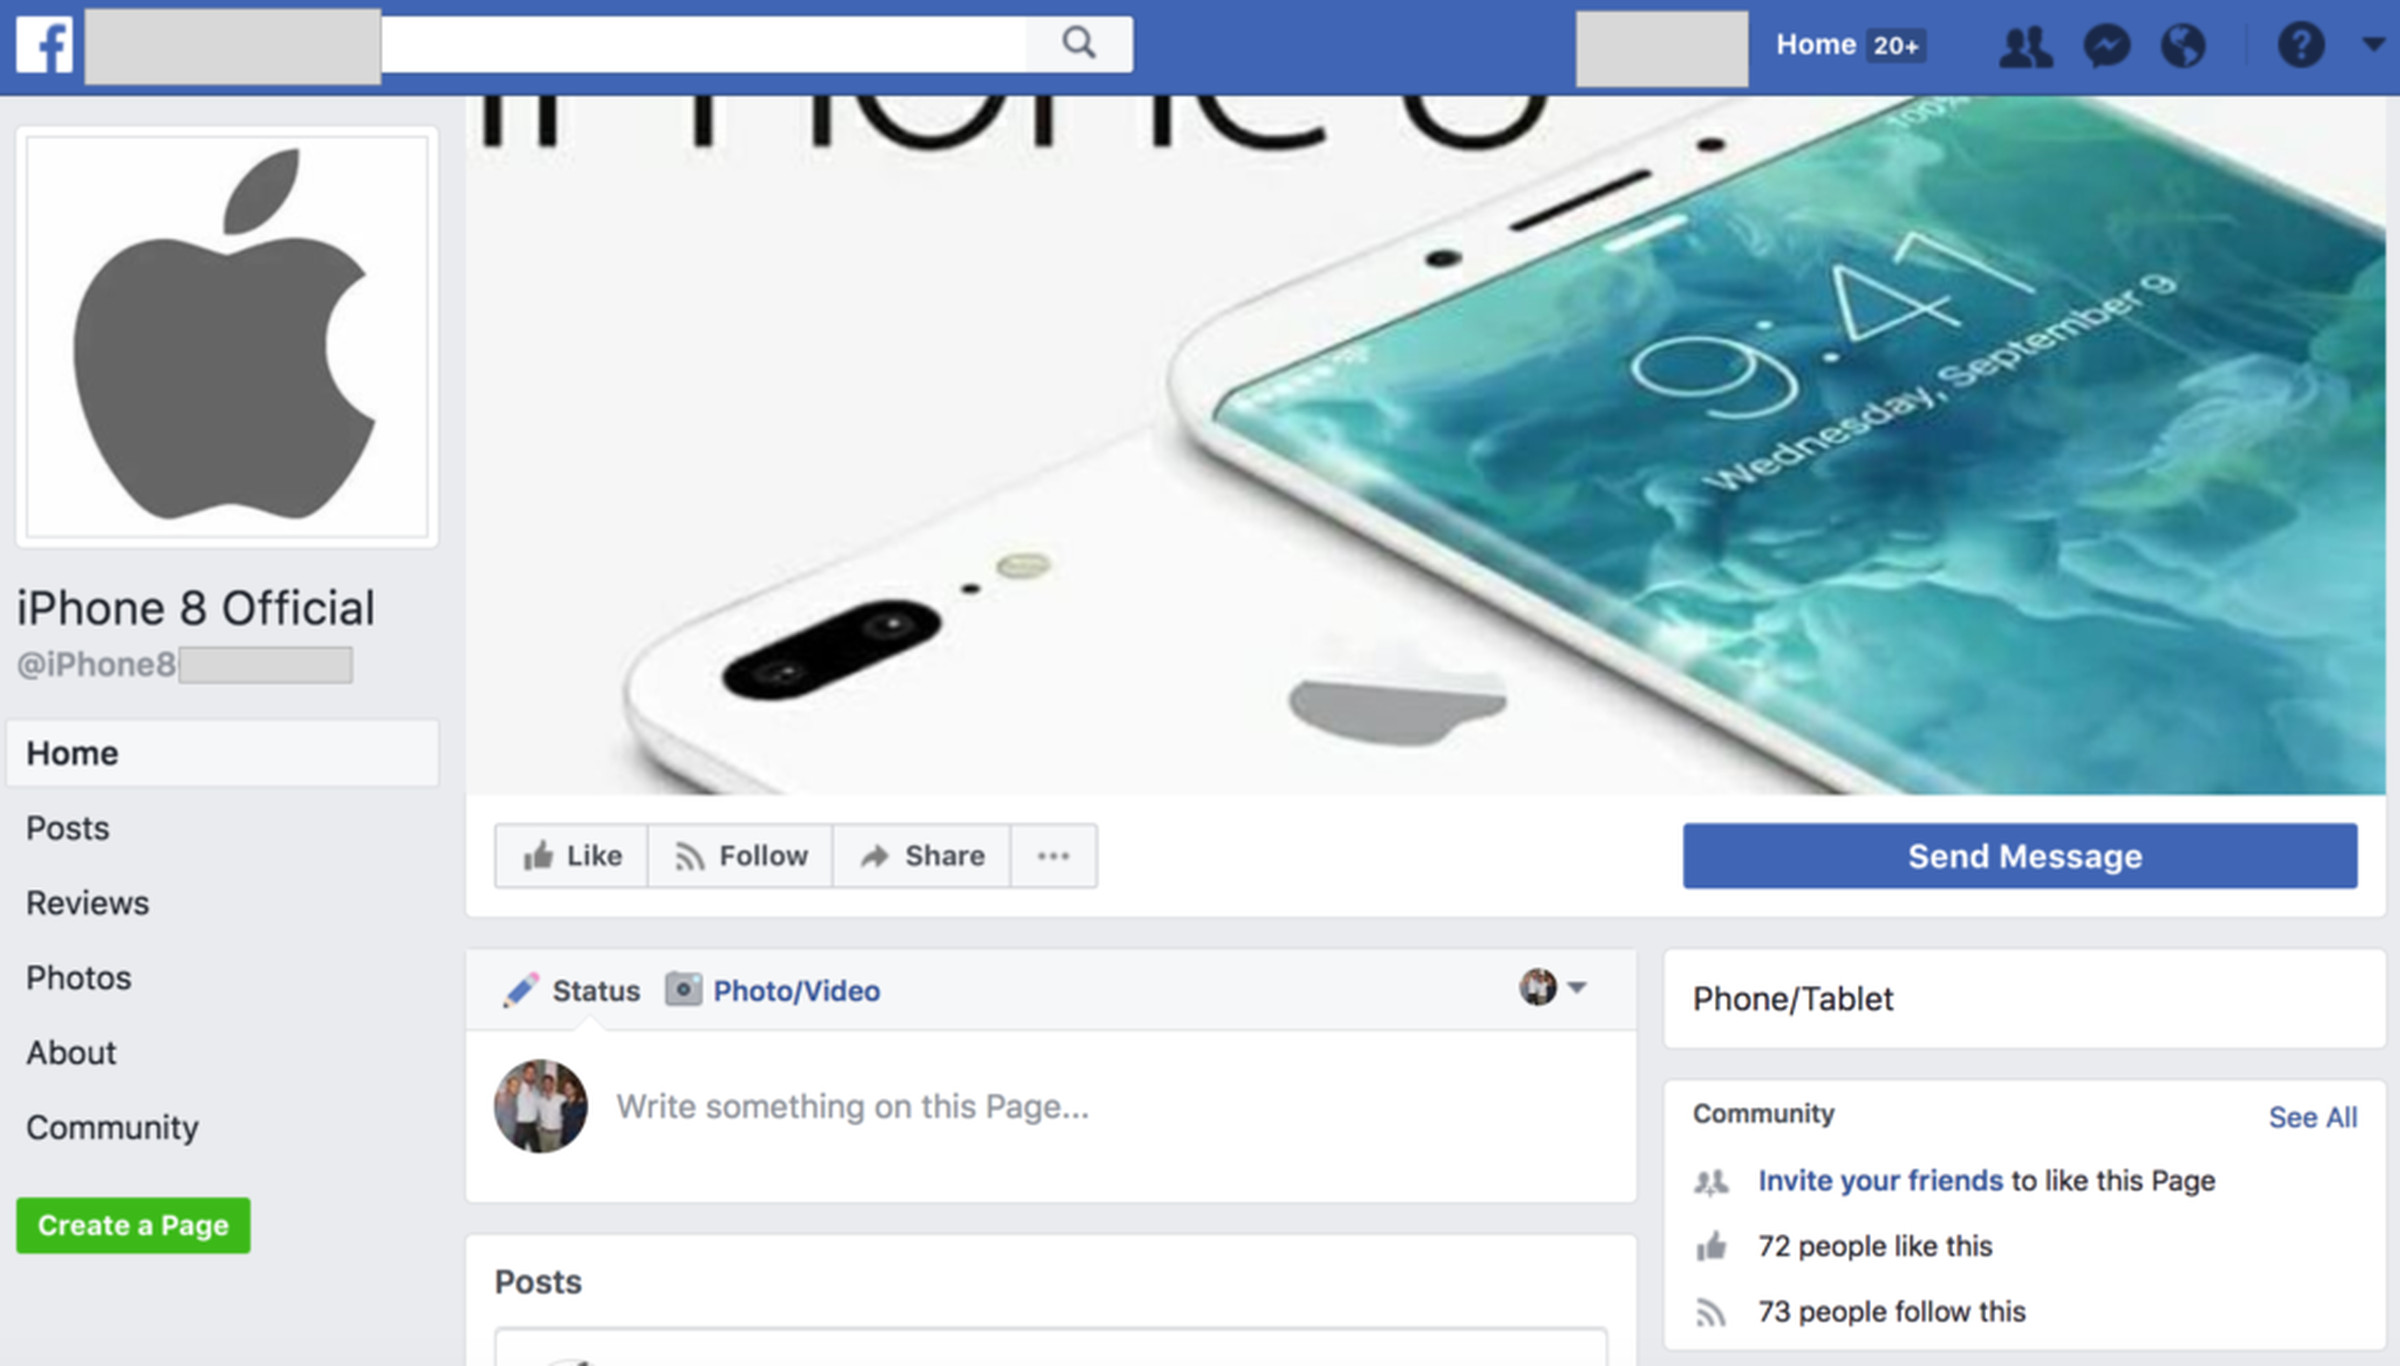 An iPhone 8 scam group on Facebook